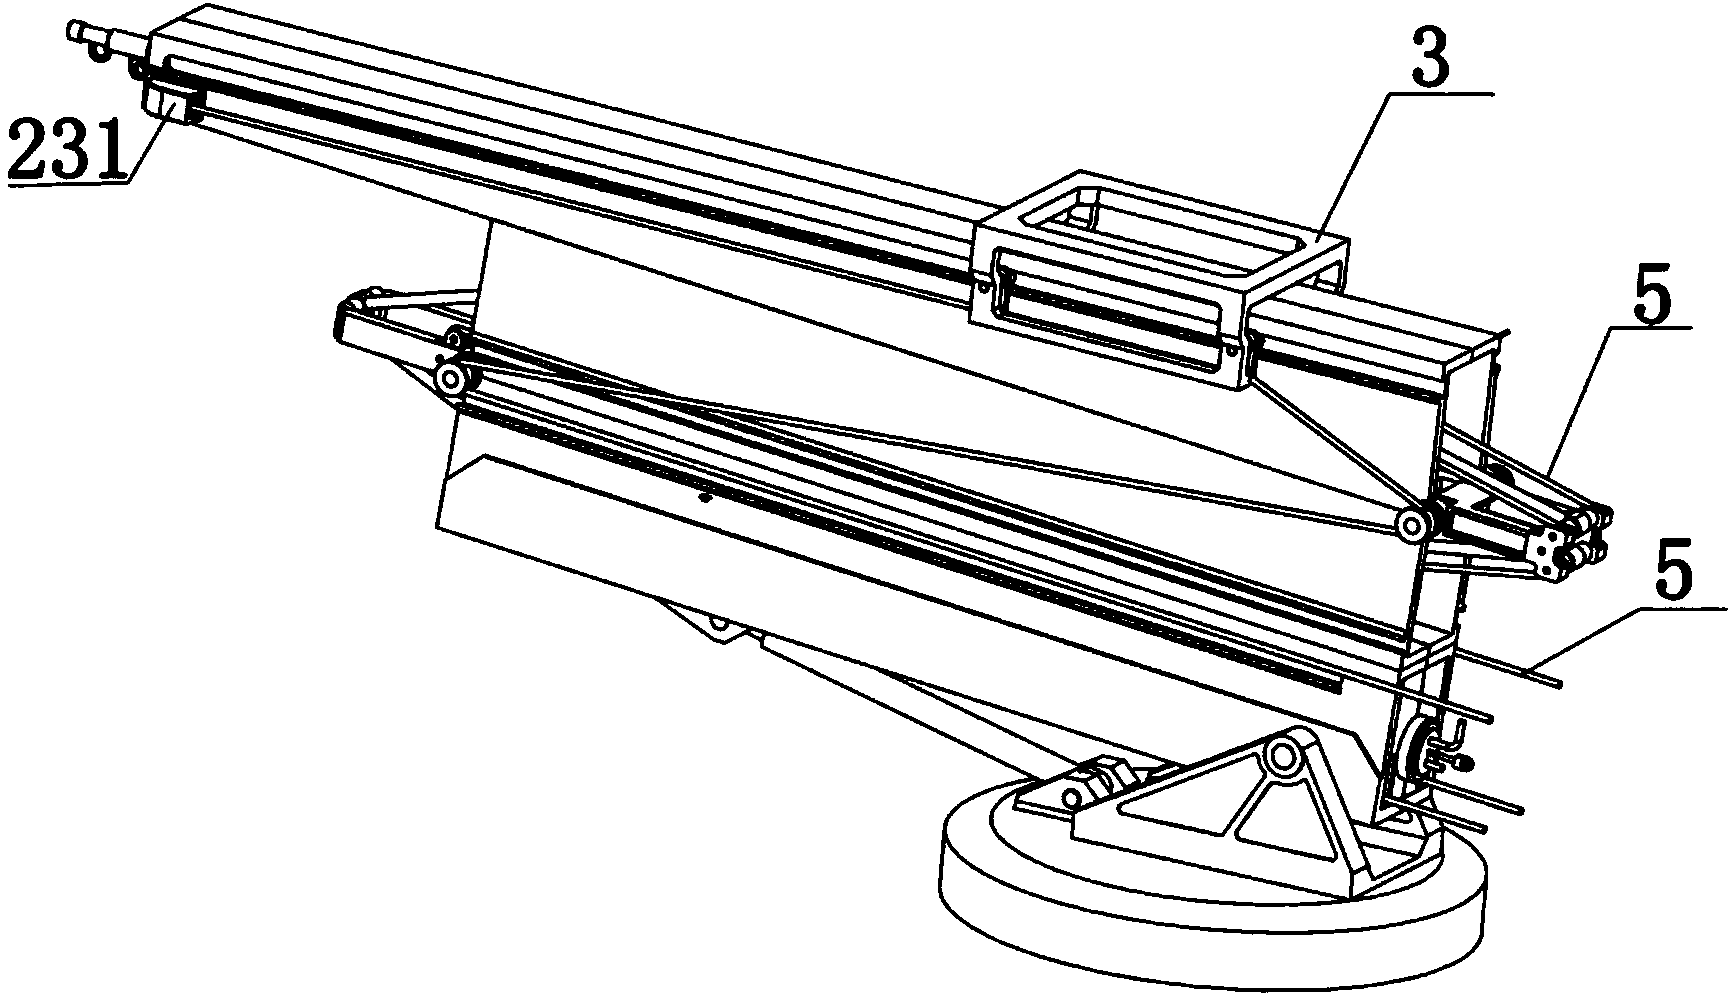 Folded launching and withdrawing device for unmanned aerial vehicle